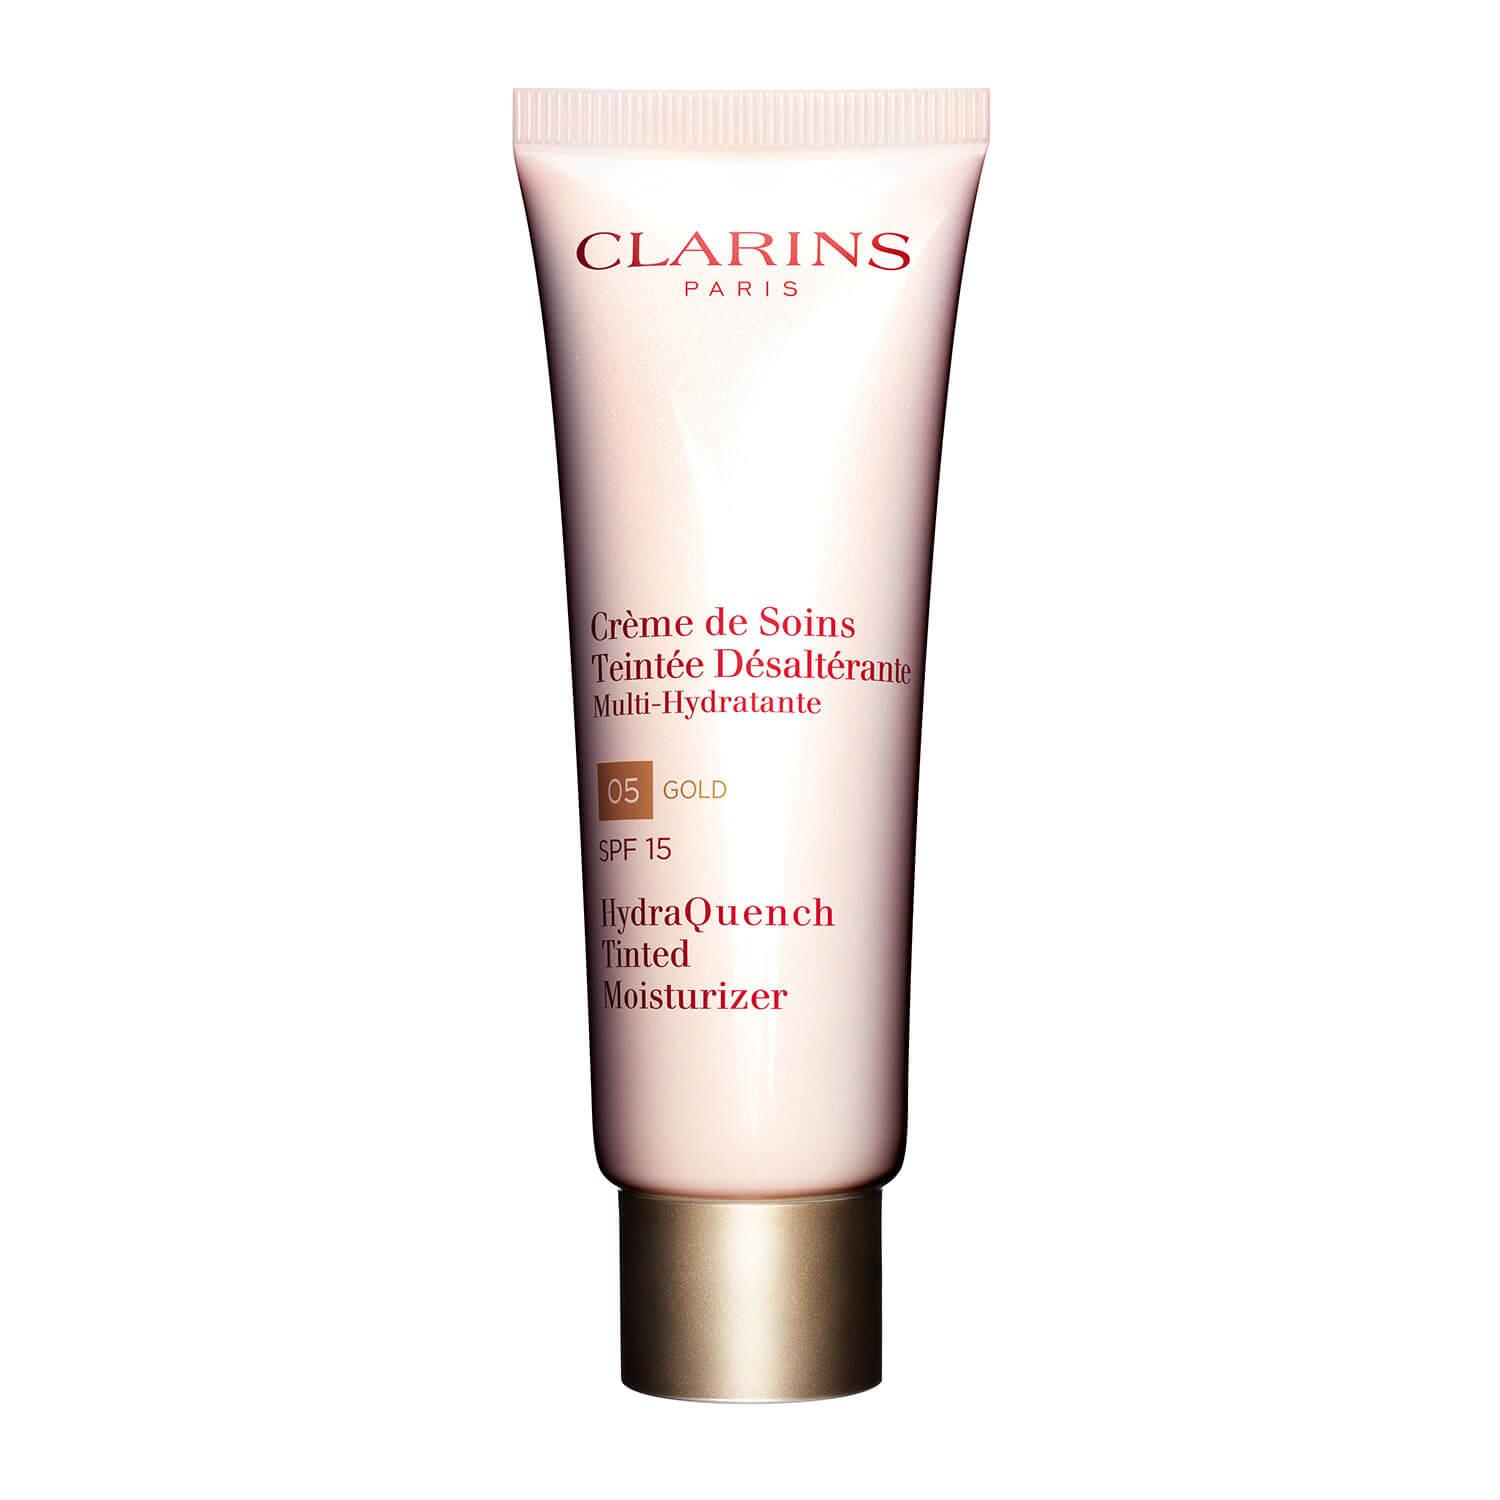 HydraQuench - Tinted Moisturizer Gold 05 SPF 15